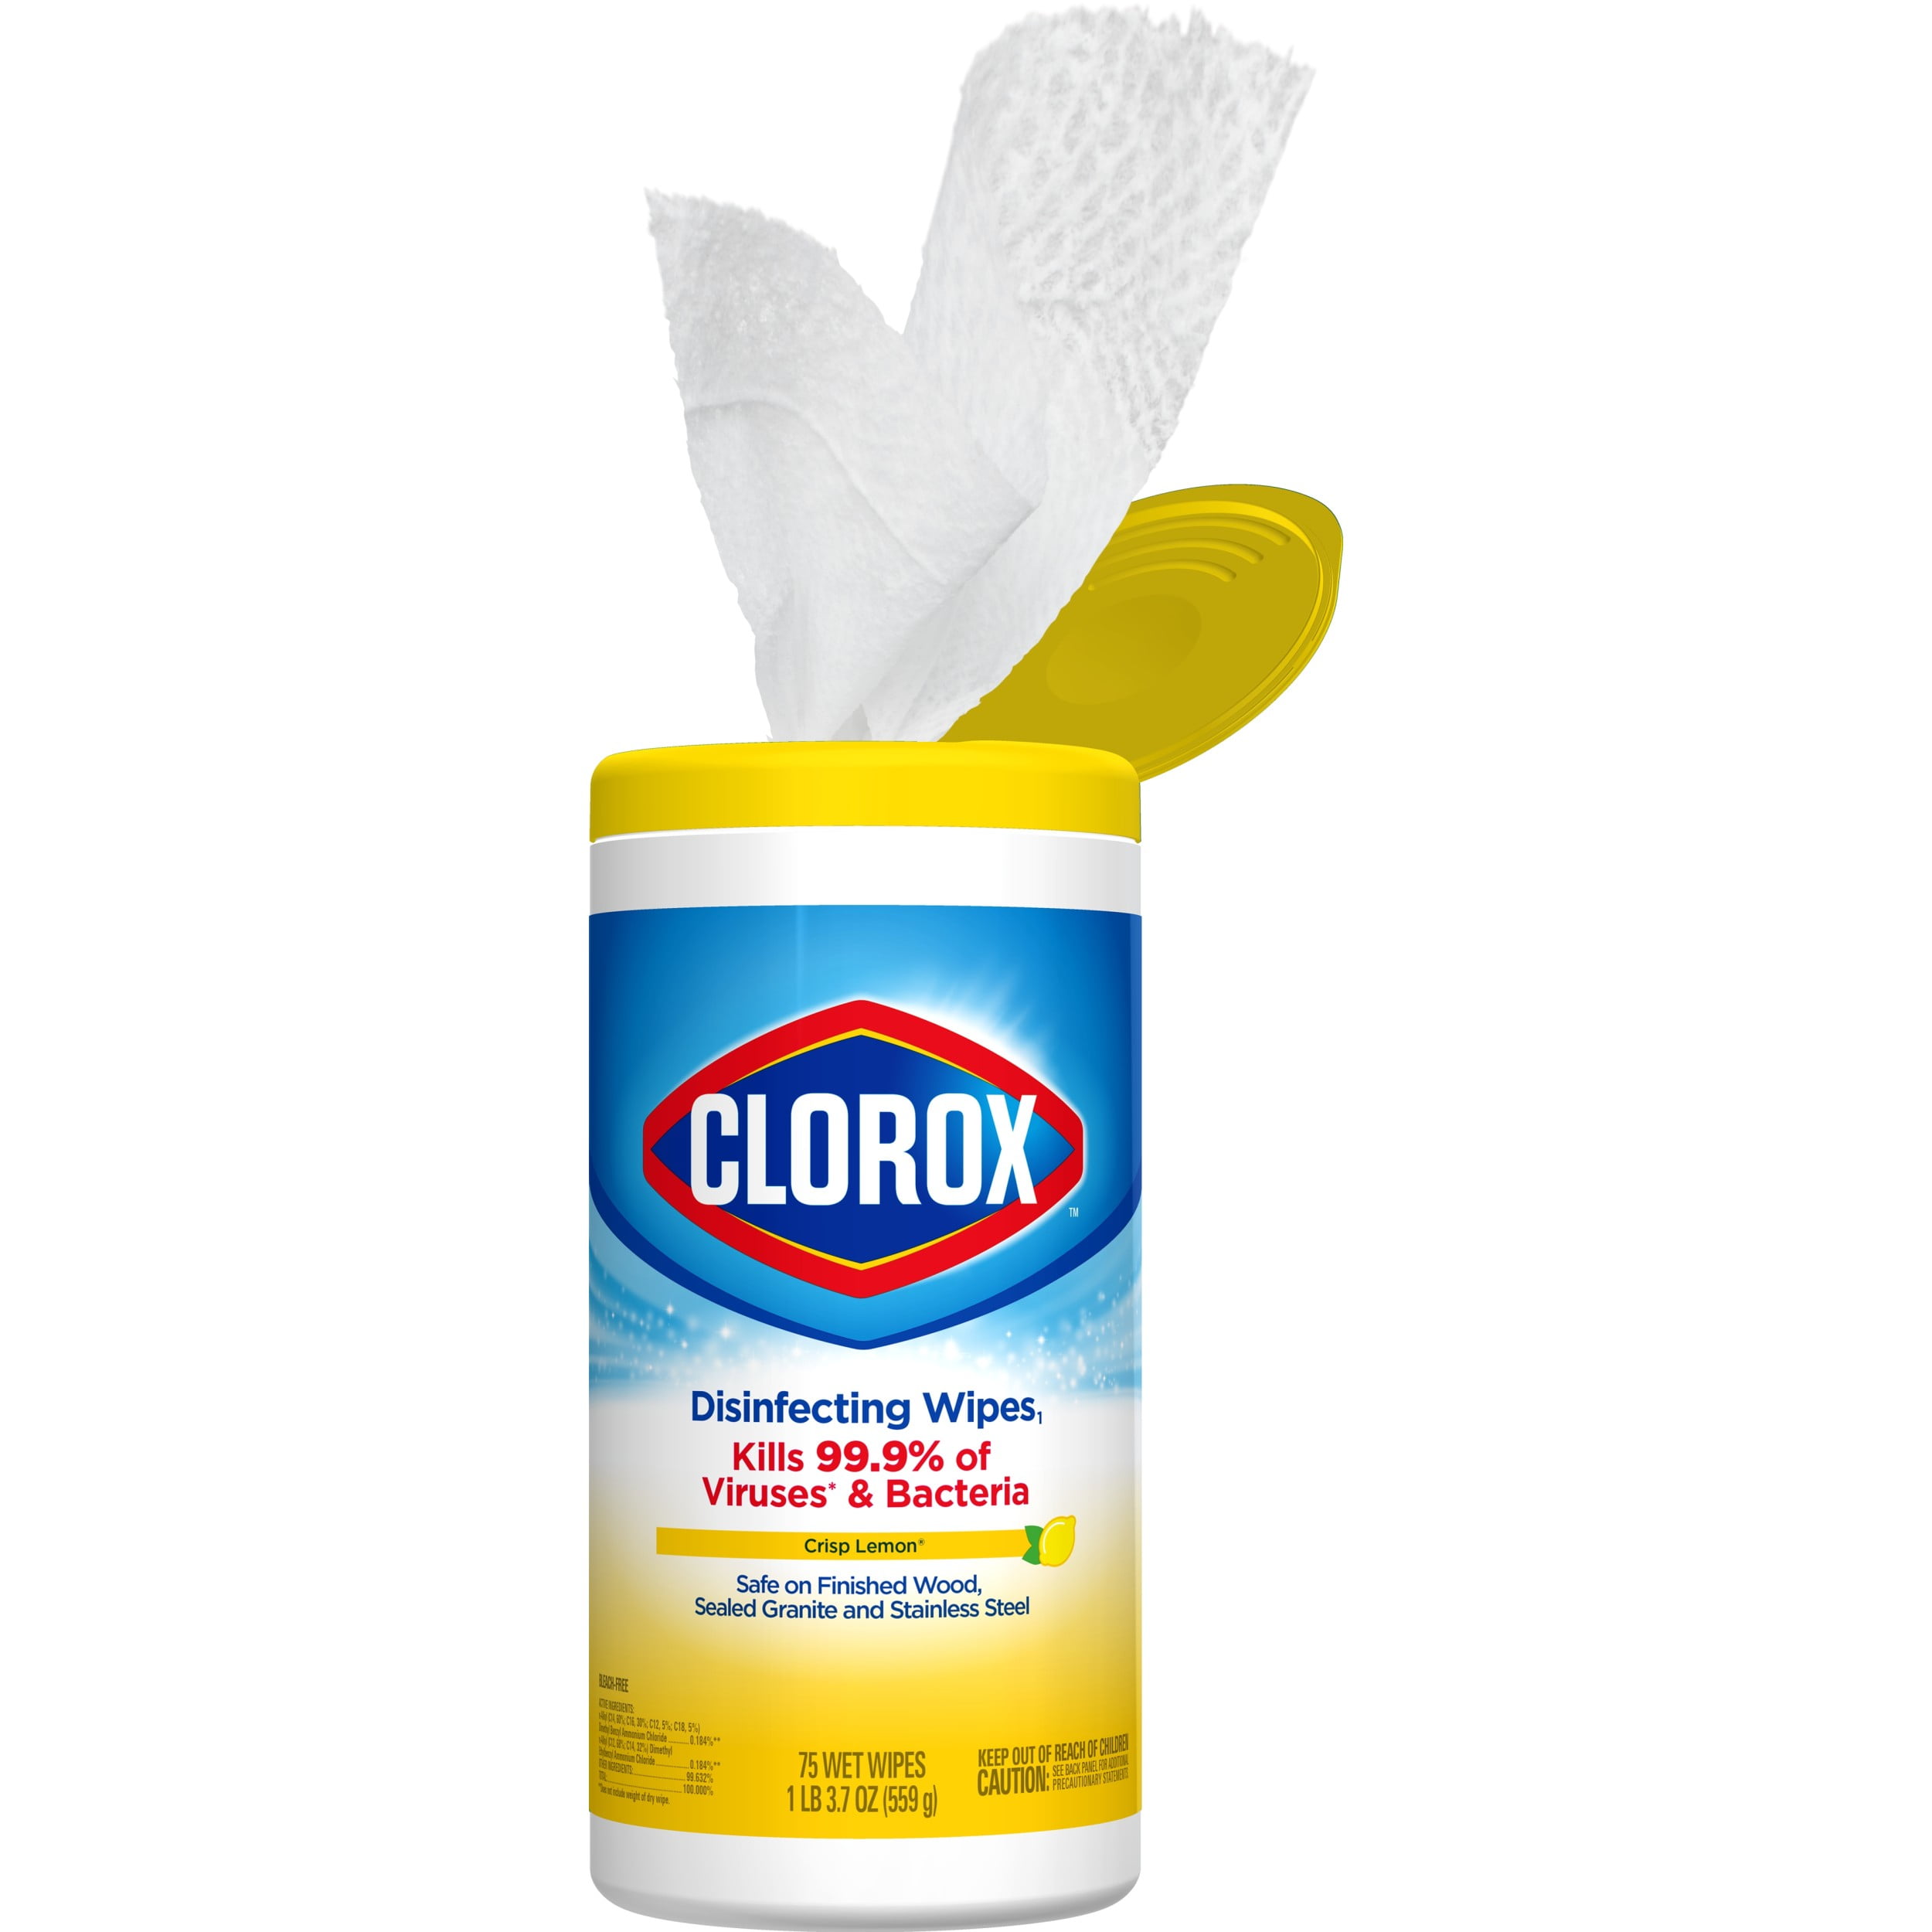 Bleach free cleaning wipes 75 count each pack of 3 clorox disinfecting wipe...